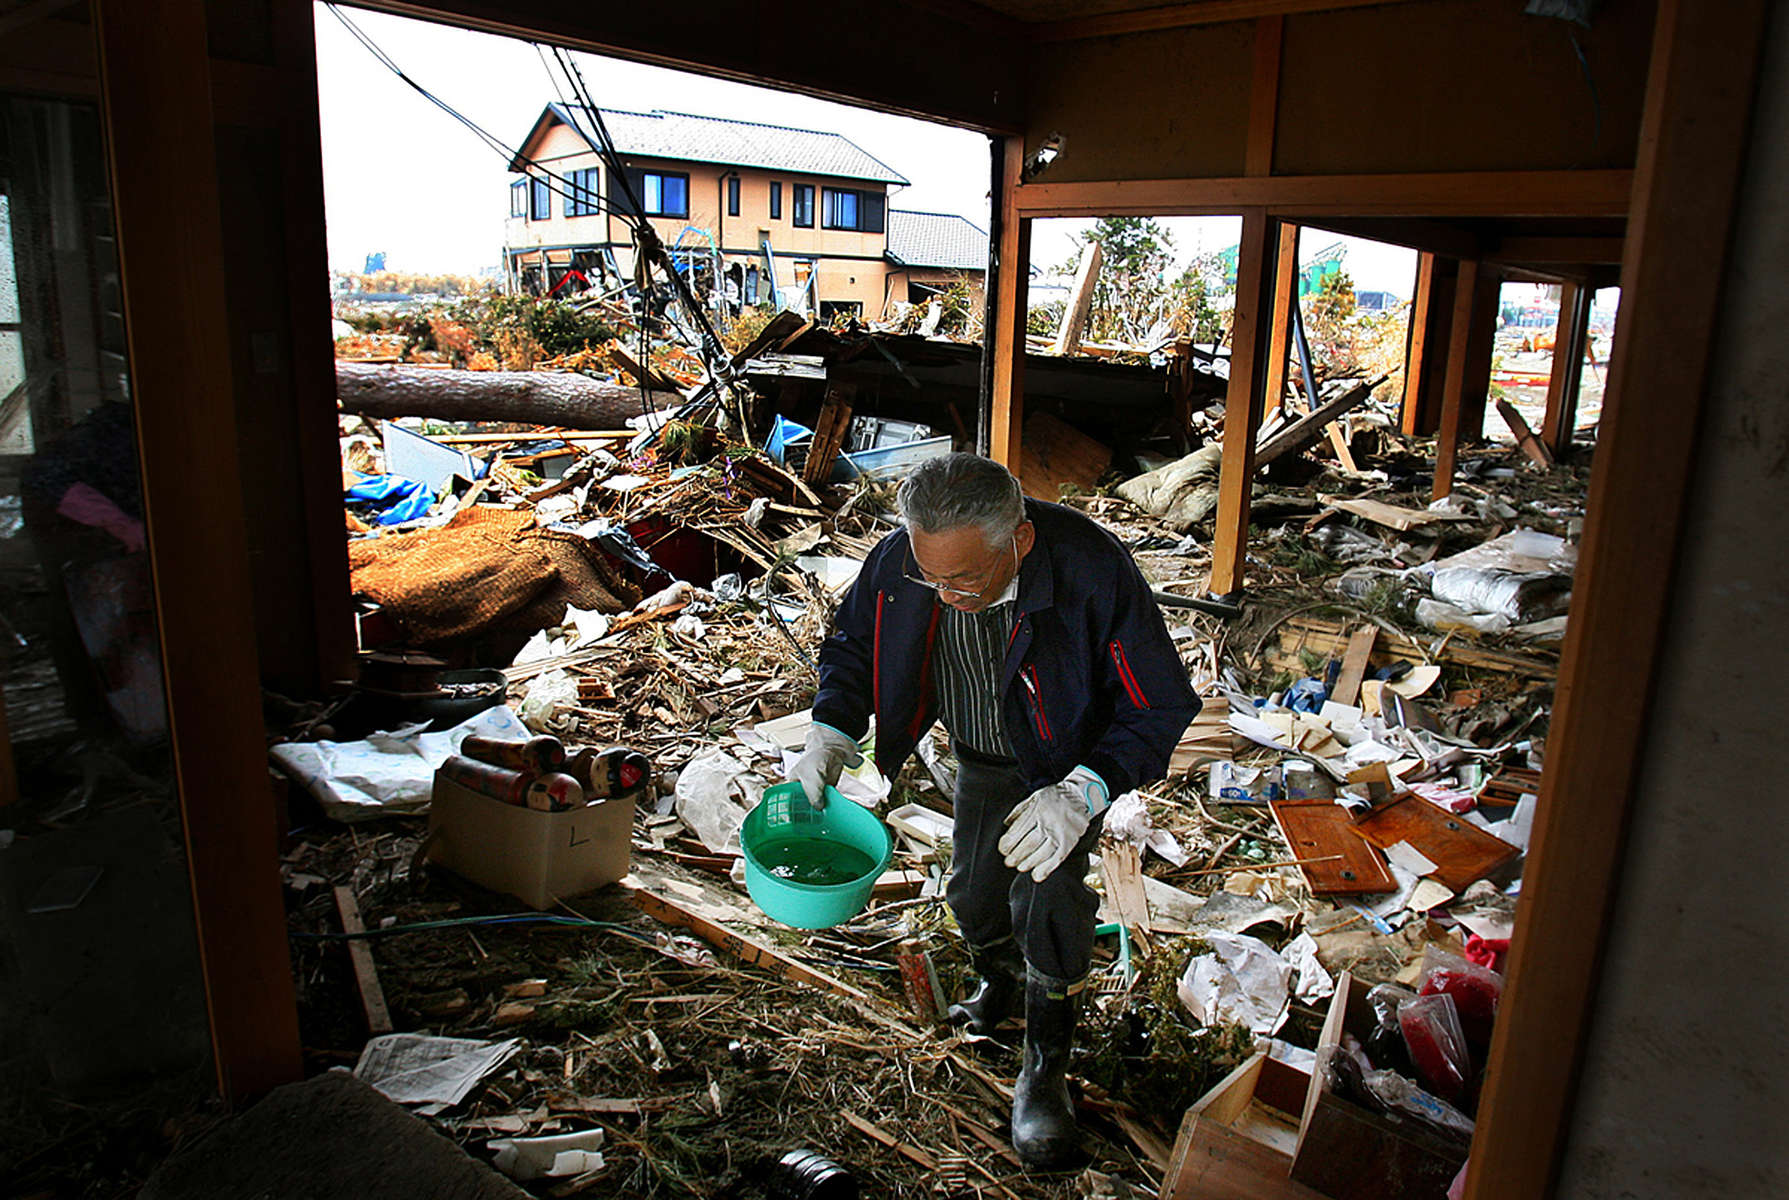 Kimio Sugai, 71, searches through the ruins of his home hoping to find anything he can use after a 9.0 earthquake and tsunami devastated Sendai in the Miyagi Prefecture of northern Japan on March 11, 2011. Kimio and his wife, Katsuko,lost their son, who was firefighter working when the tsunami hit. (The Press-Enterprise/ Mark Zaleski)